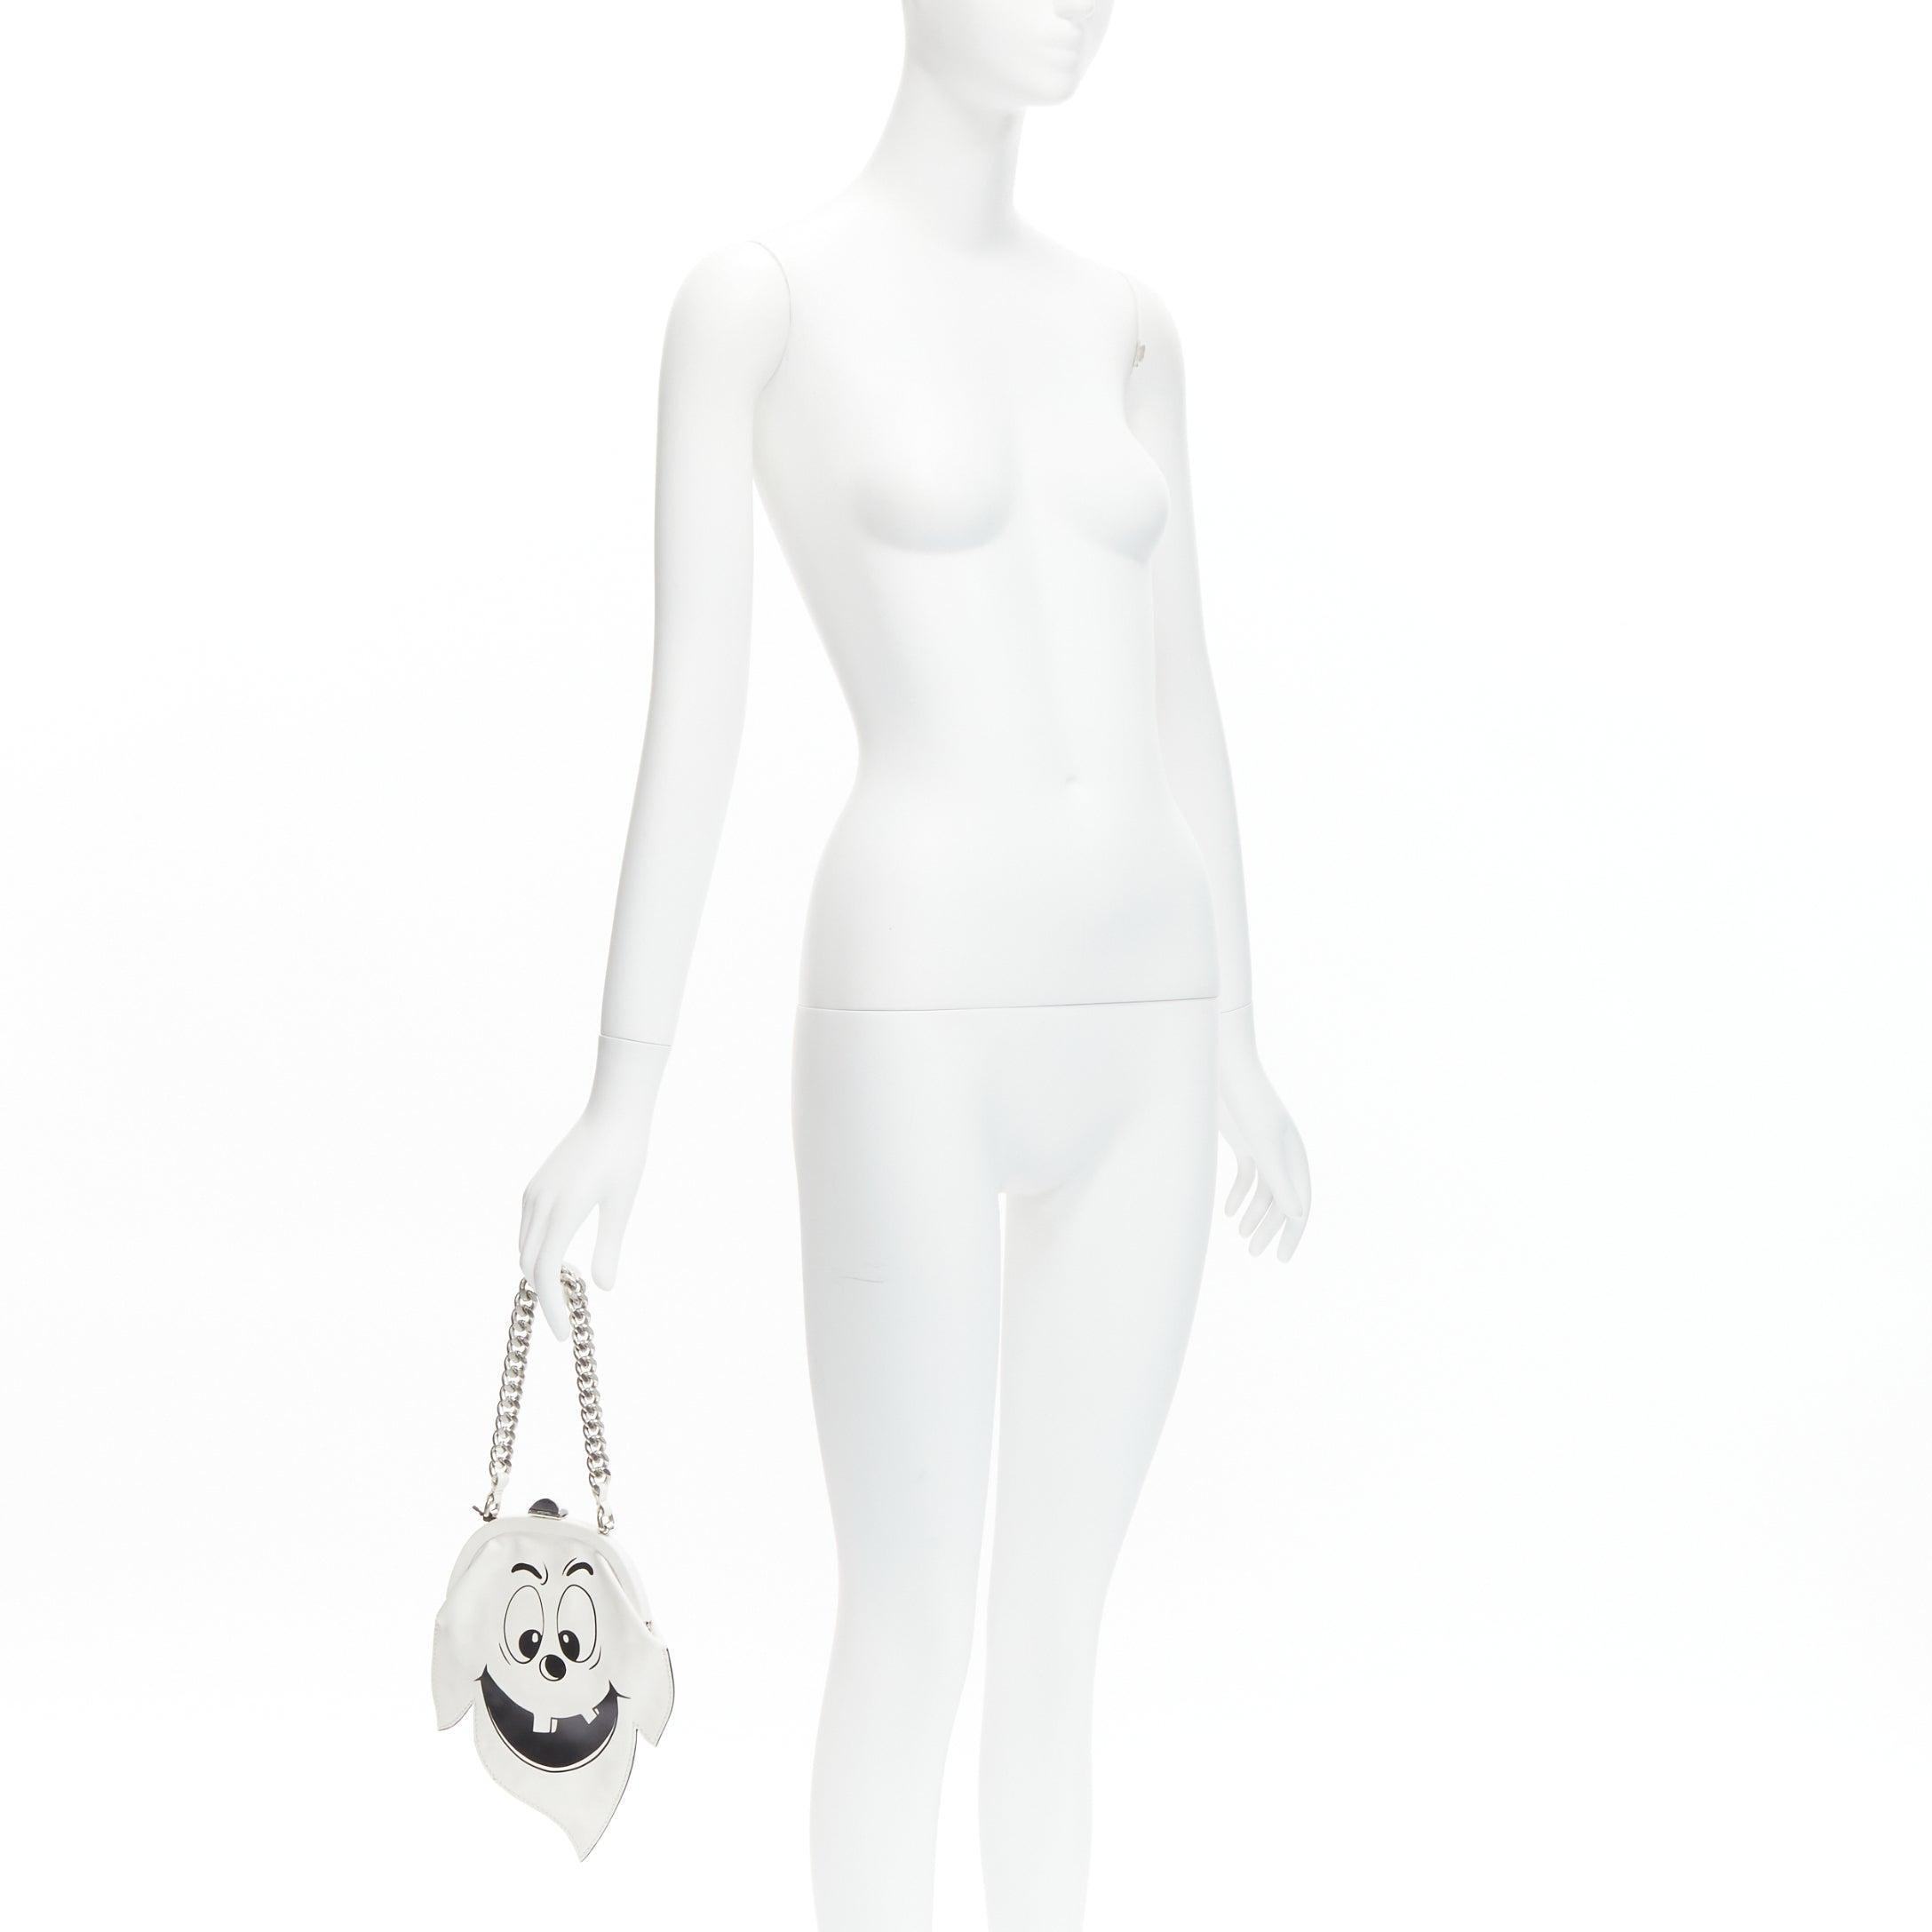 new MOSCHINO COUTURE Runway white Friendly Ghost toothless smile silver chain wrist purse bag
Reference: TGAS/D00499
Brand: Moschino
Designer: Jeremy Scott
Material: Leather, Metal
Color: White, Black
Pattern: Solid
Closure: Clasp
Lining: Black